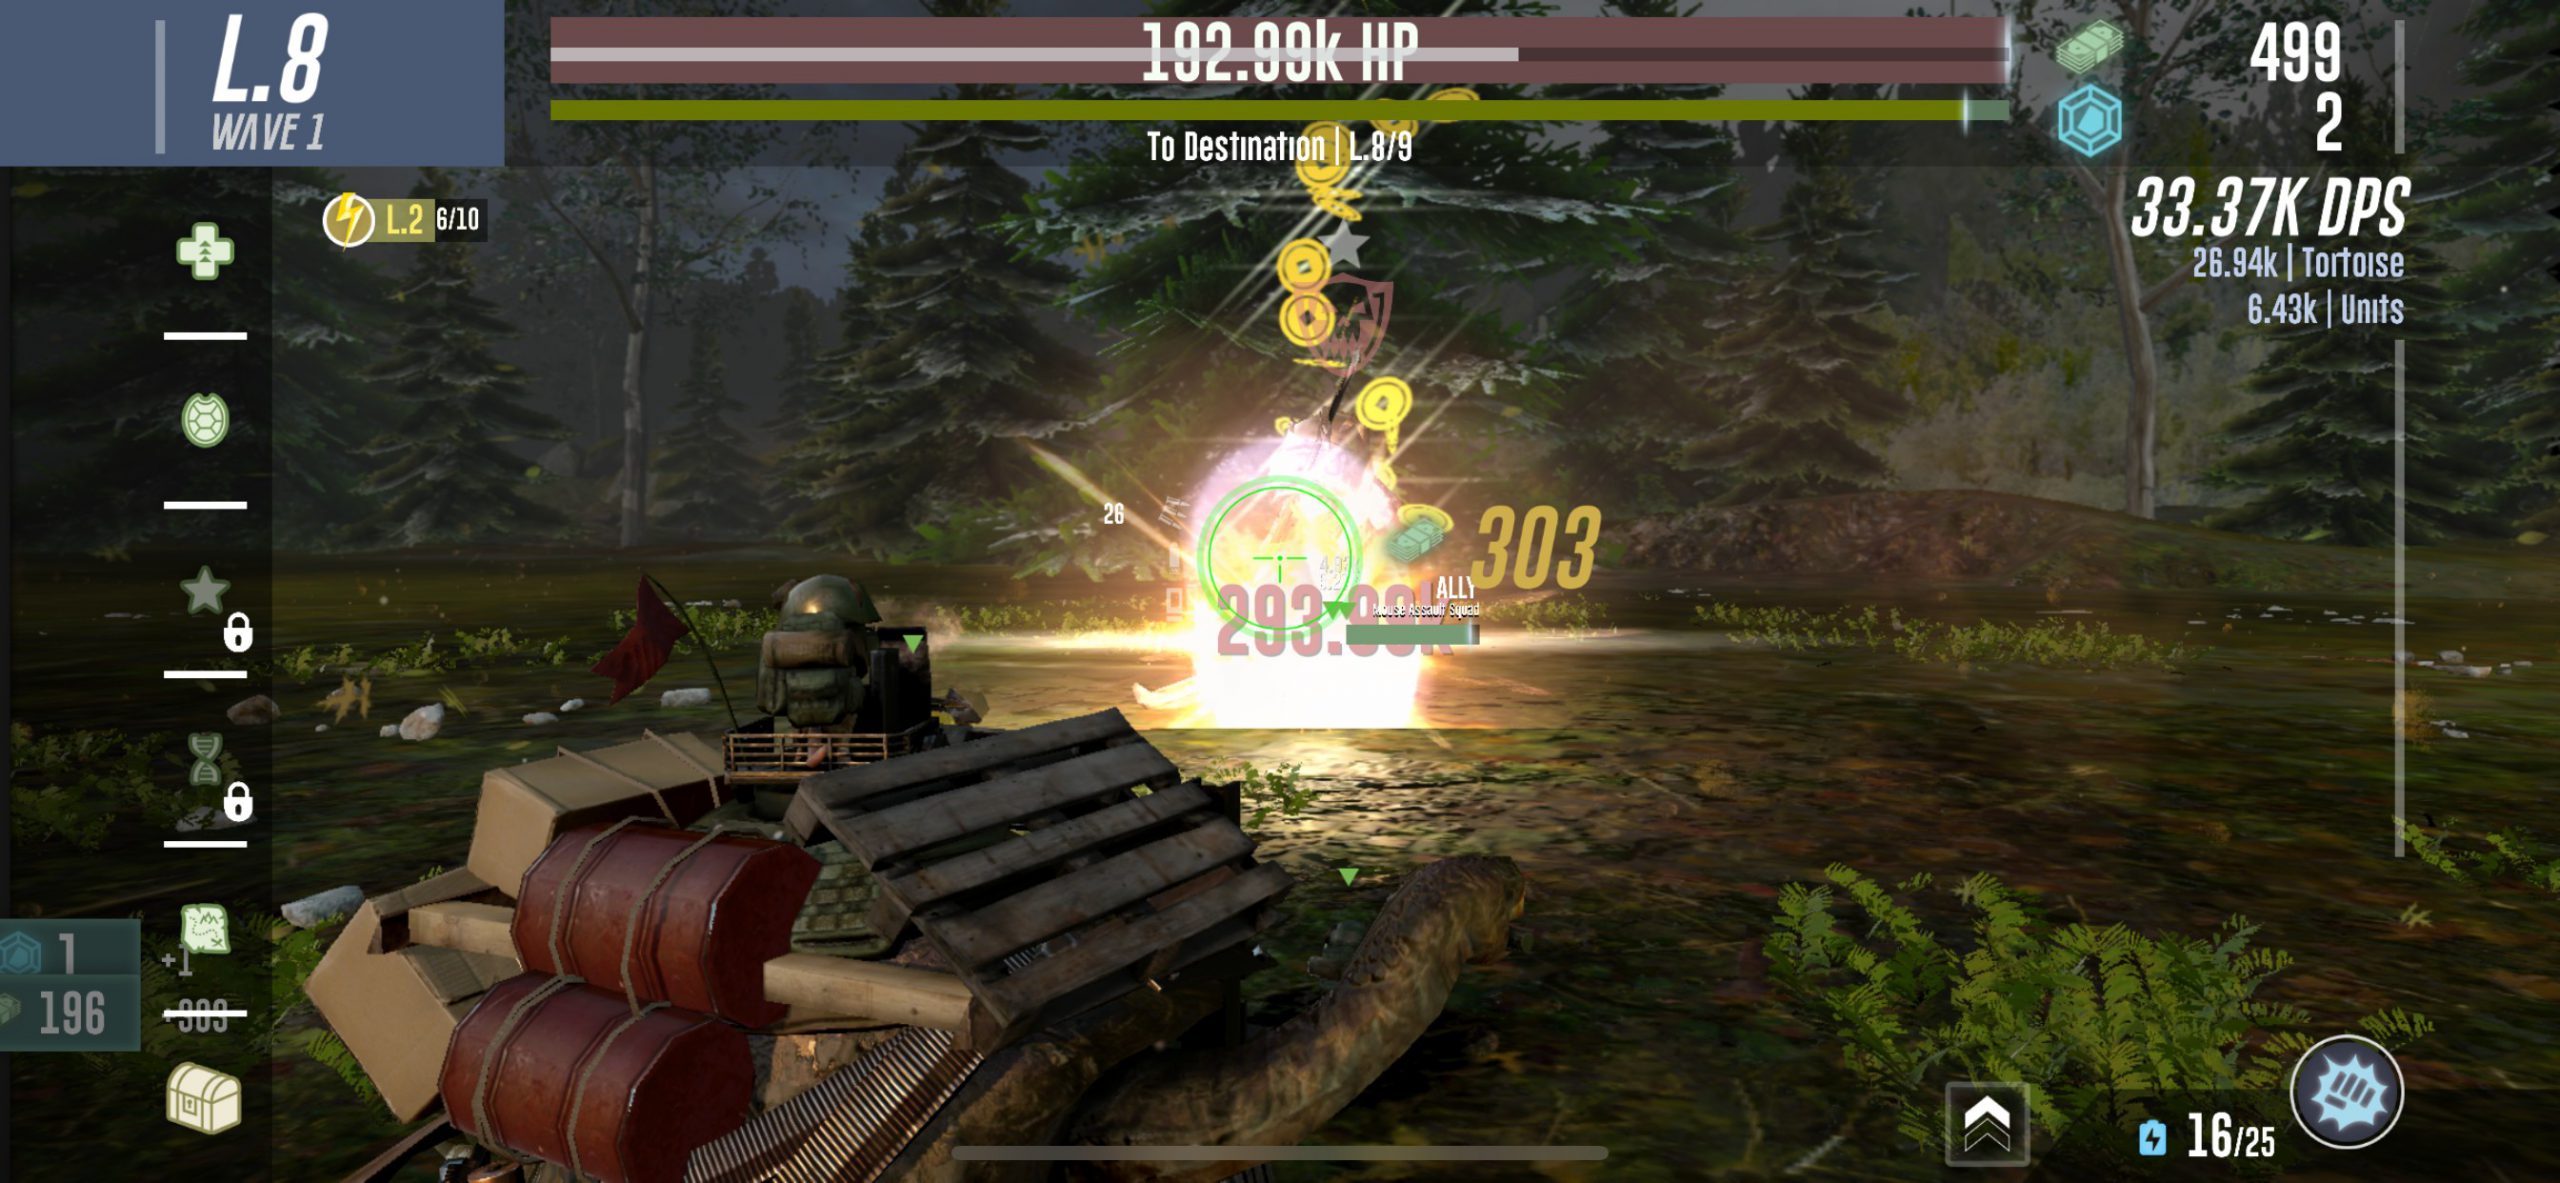 War Tortoise 2 Review: An Idle Shooter Worth Shelling Out For